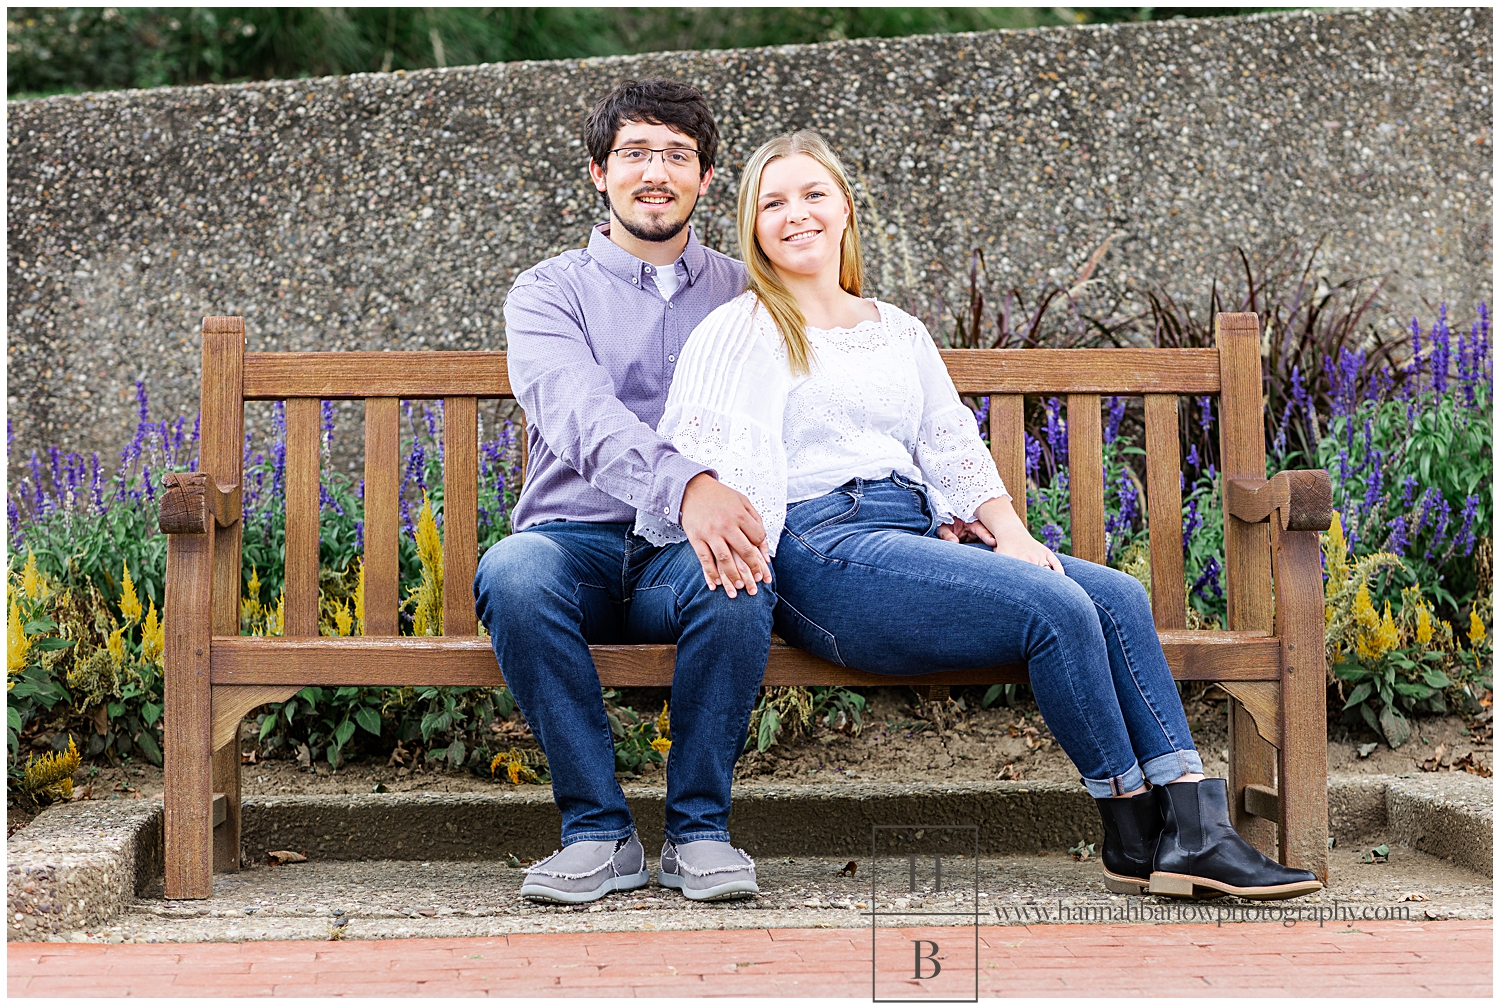 Couple sitting on bench in front of purple flower bed.